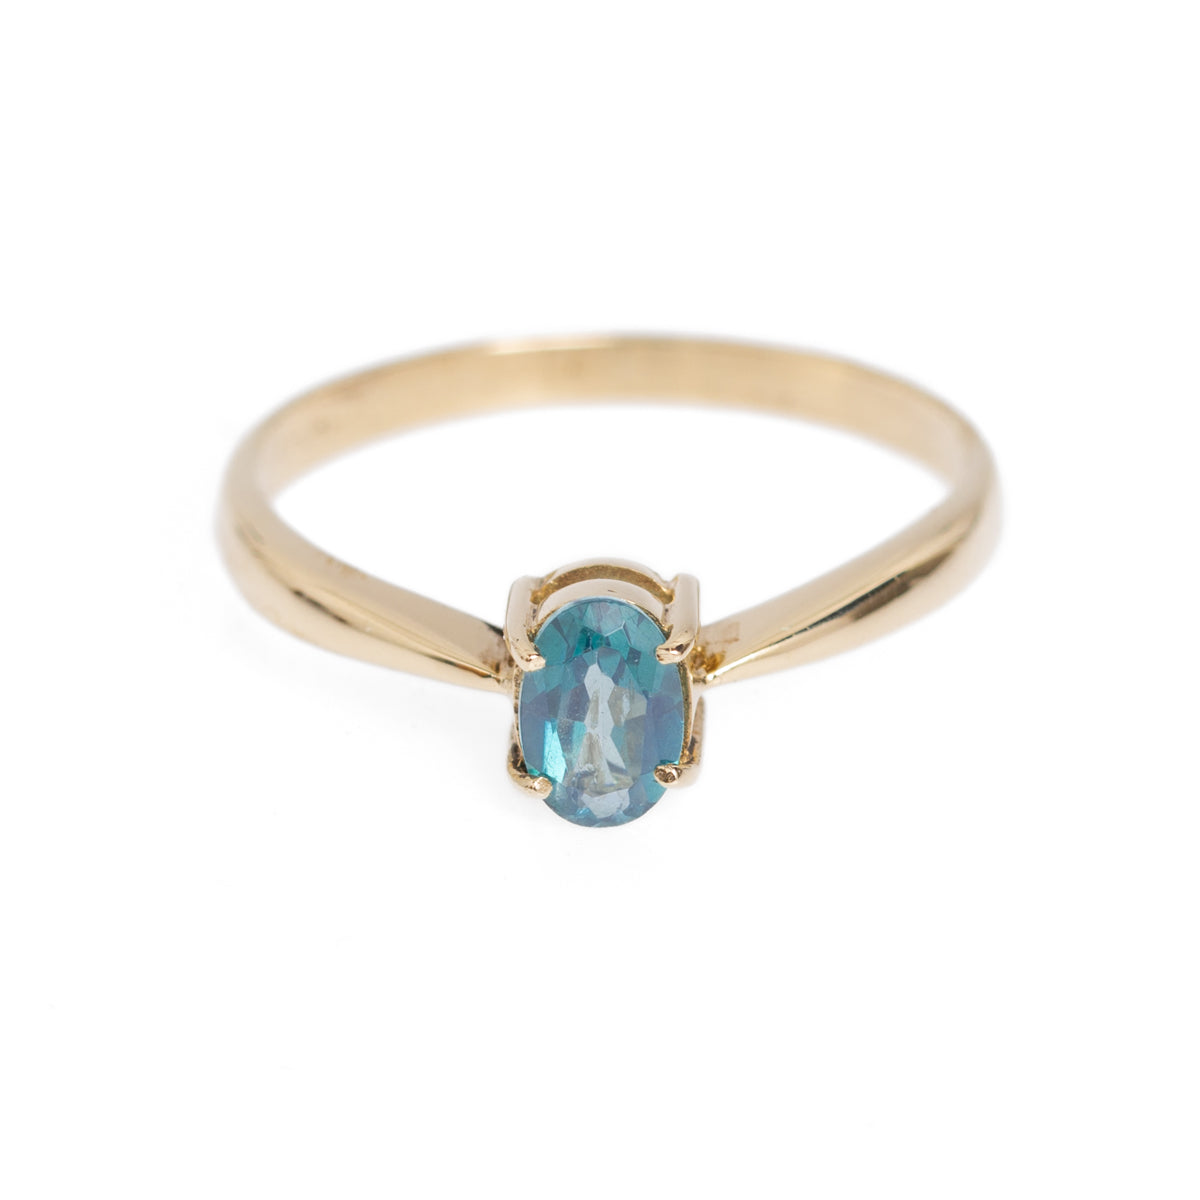 Vintage 9ct Gold Blue Topaz Solitaire Ring UK Size P (Code A1029)